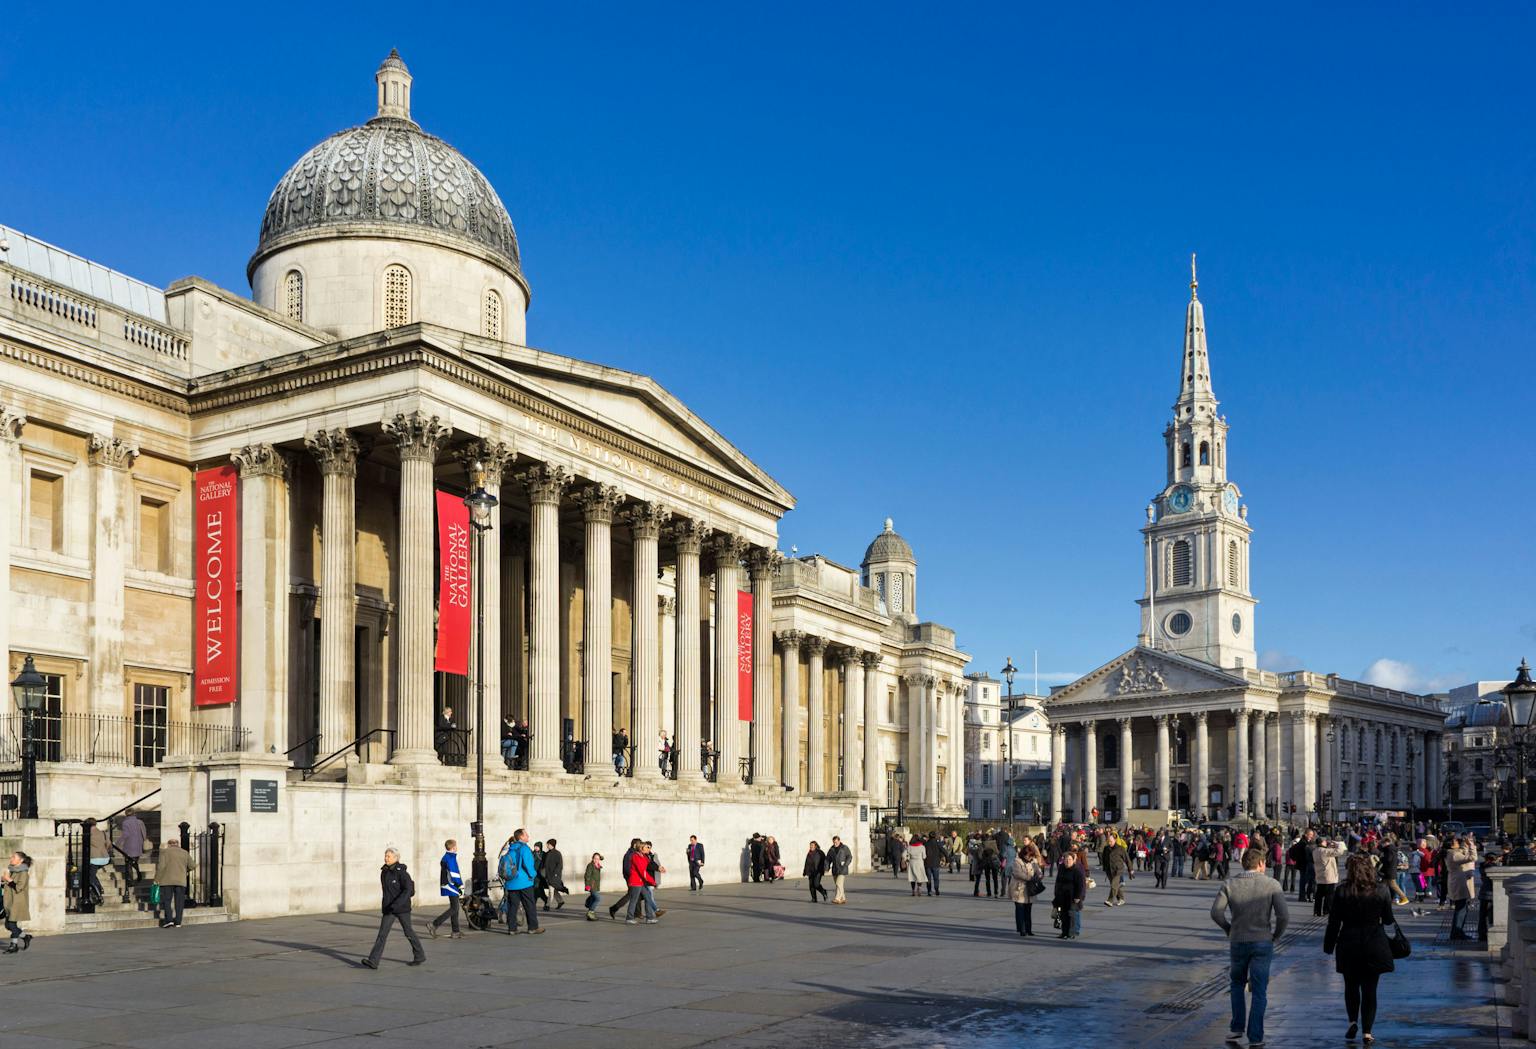 The National Gallery in Trafalgar Square, where Purcell have been working on various projects for over 30 years.